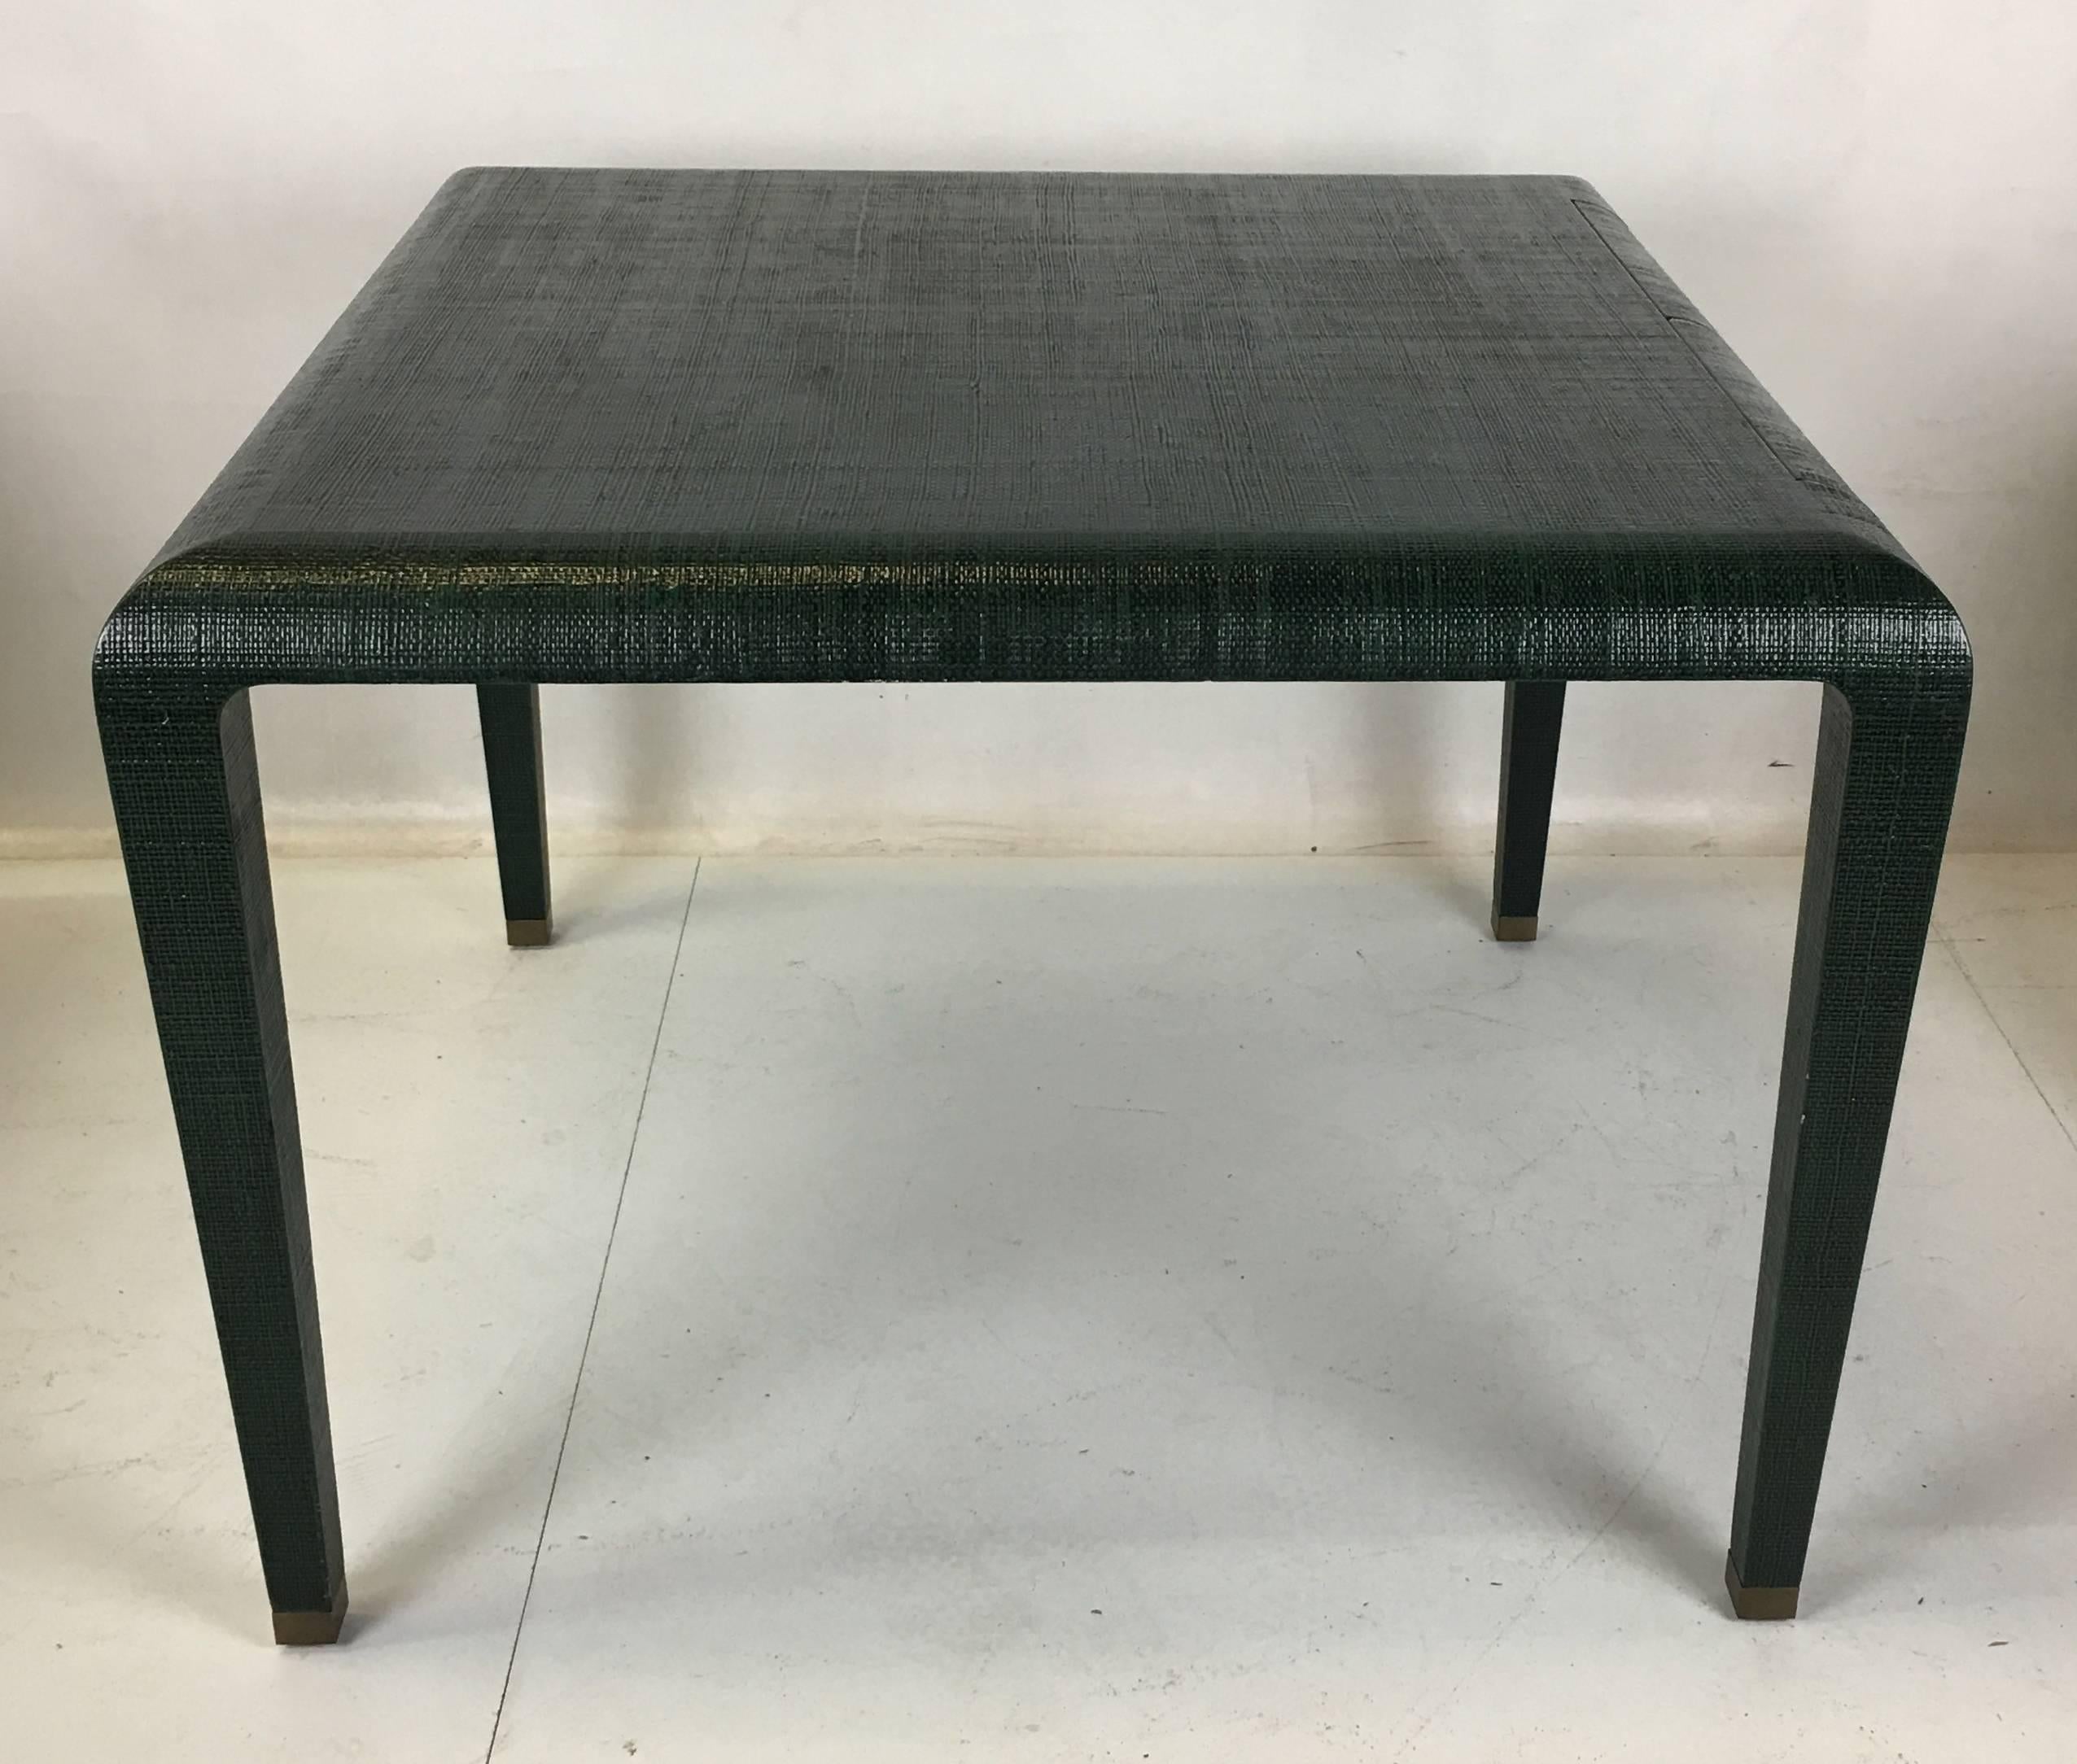 Superbly crafted games table clad in lacquered Raffia with two pencil drawers on one side. The tapered square legs terminate in heavy brass sabots. The Raffia is lacquered in hunter green with black undertones. Van Horn's quality and workmanship is